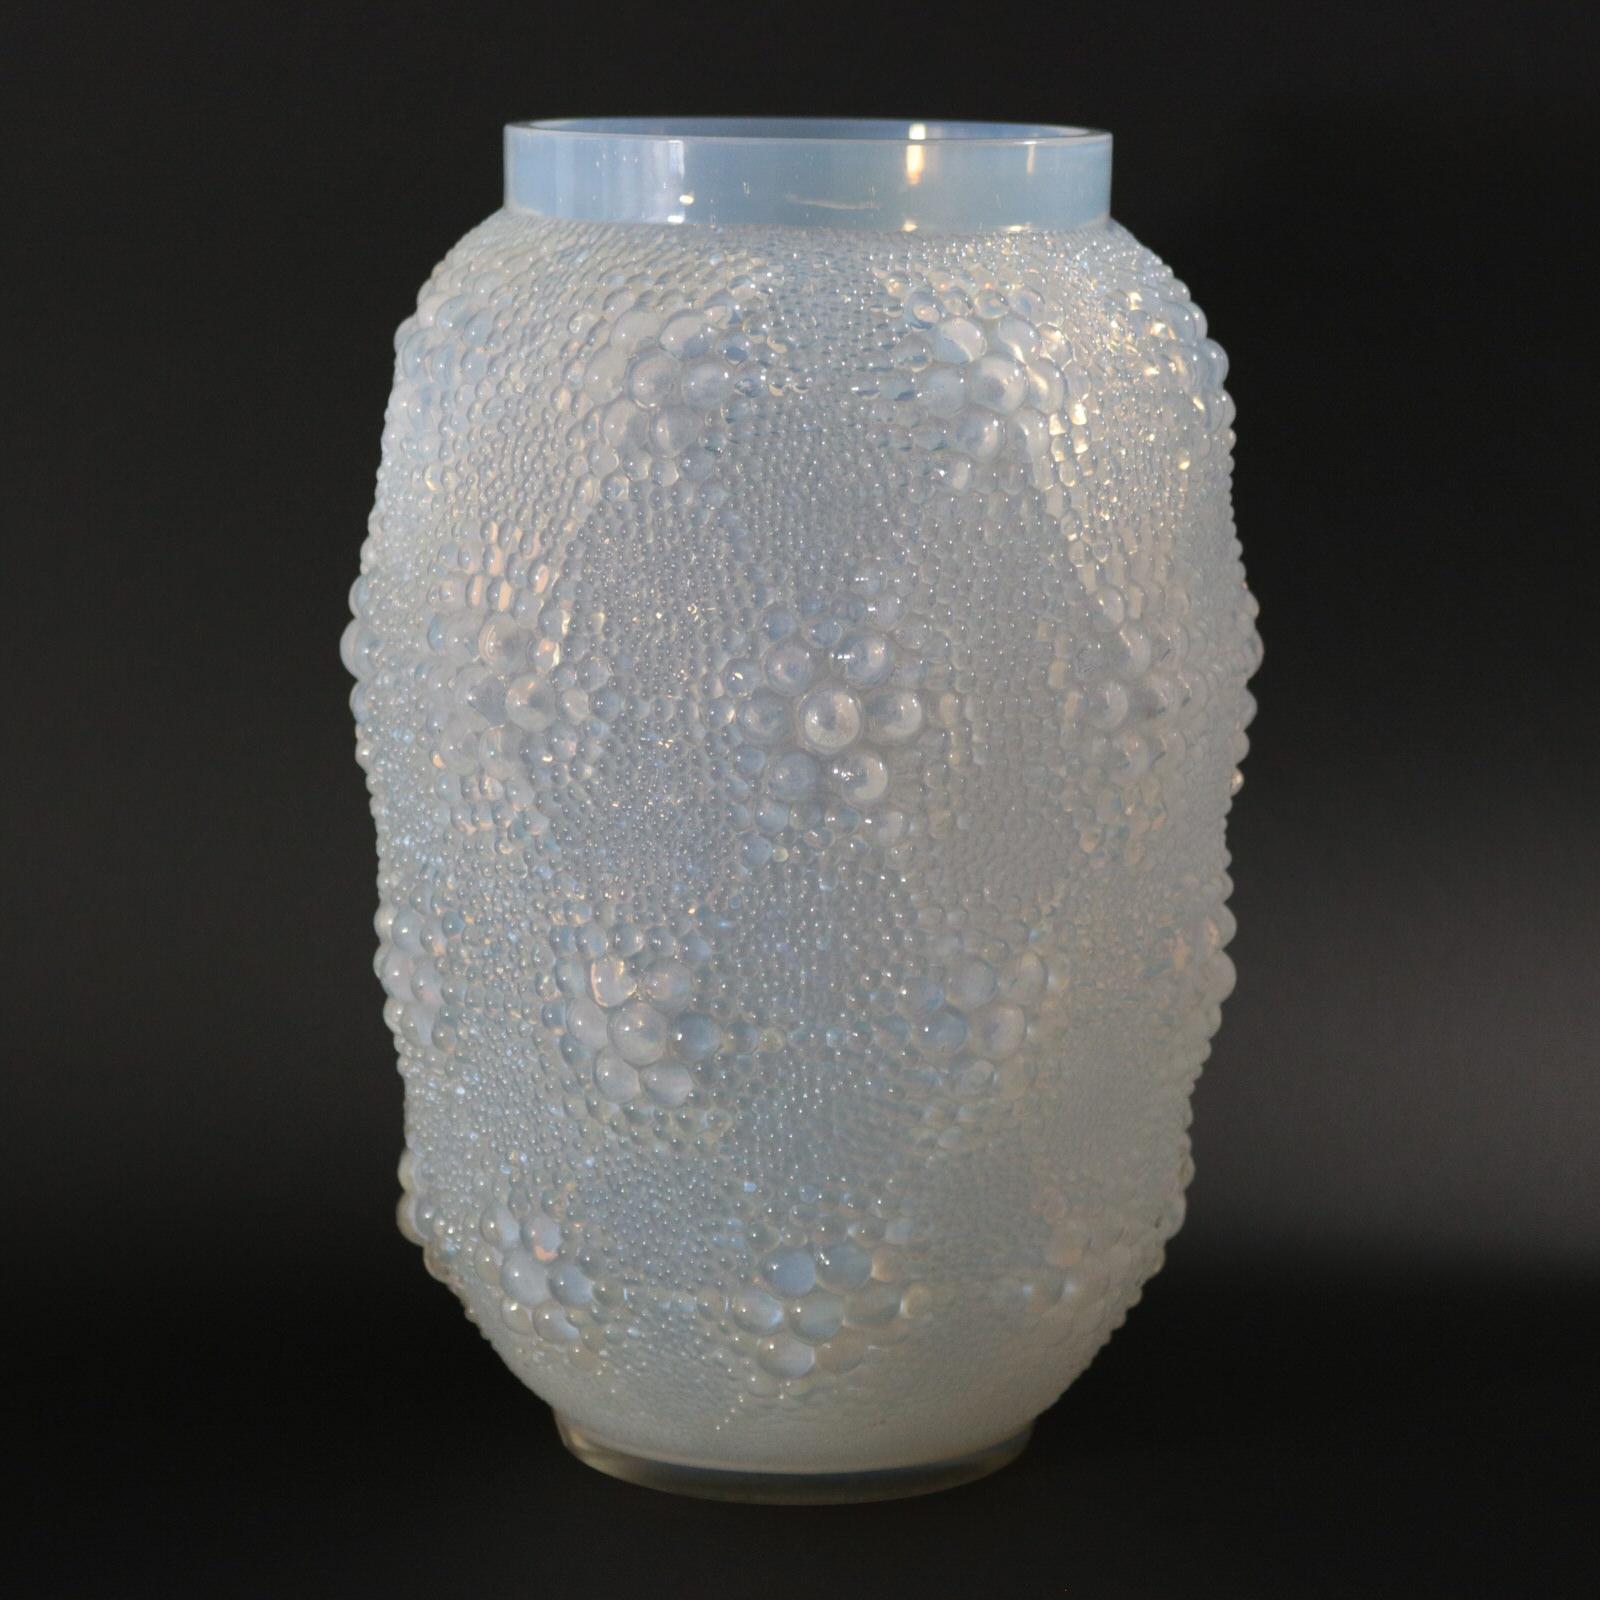 Rene Lalique opalescent glass 'Davos' vase. This pattern features bubbles. Stenciled makers mark, 'R. LALIQUE FRANCE'. Book reference: Marcilhac 1079.